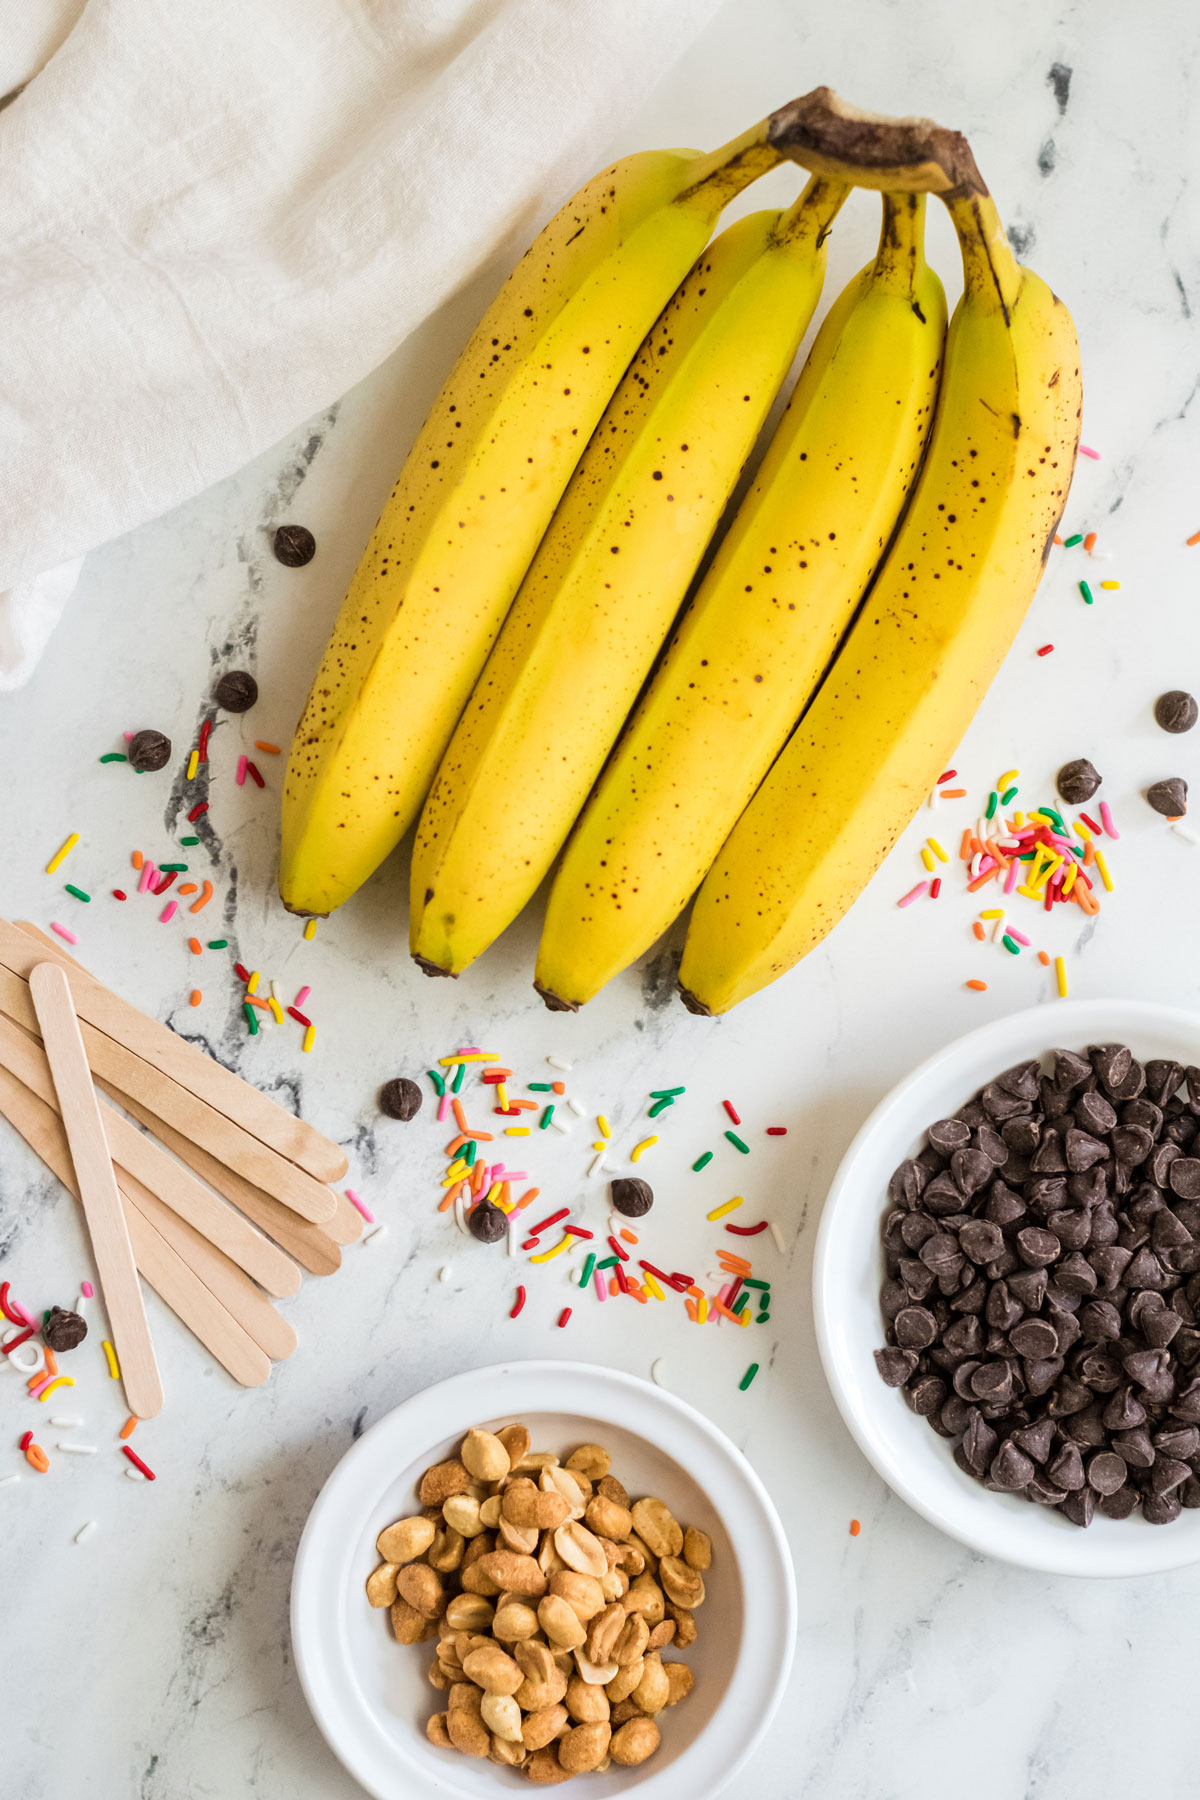 Ingredients of Banana Pops on a white counter including bananas, chocolate chips, popsicle sticks, chopped peanuts and sprinkles. 